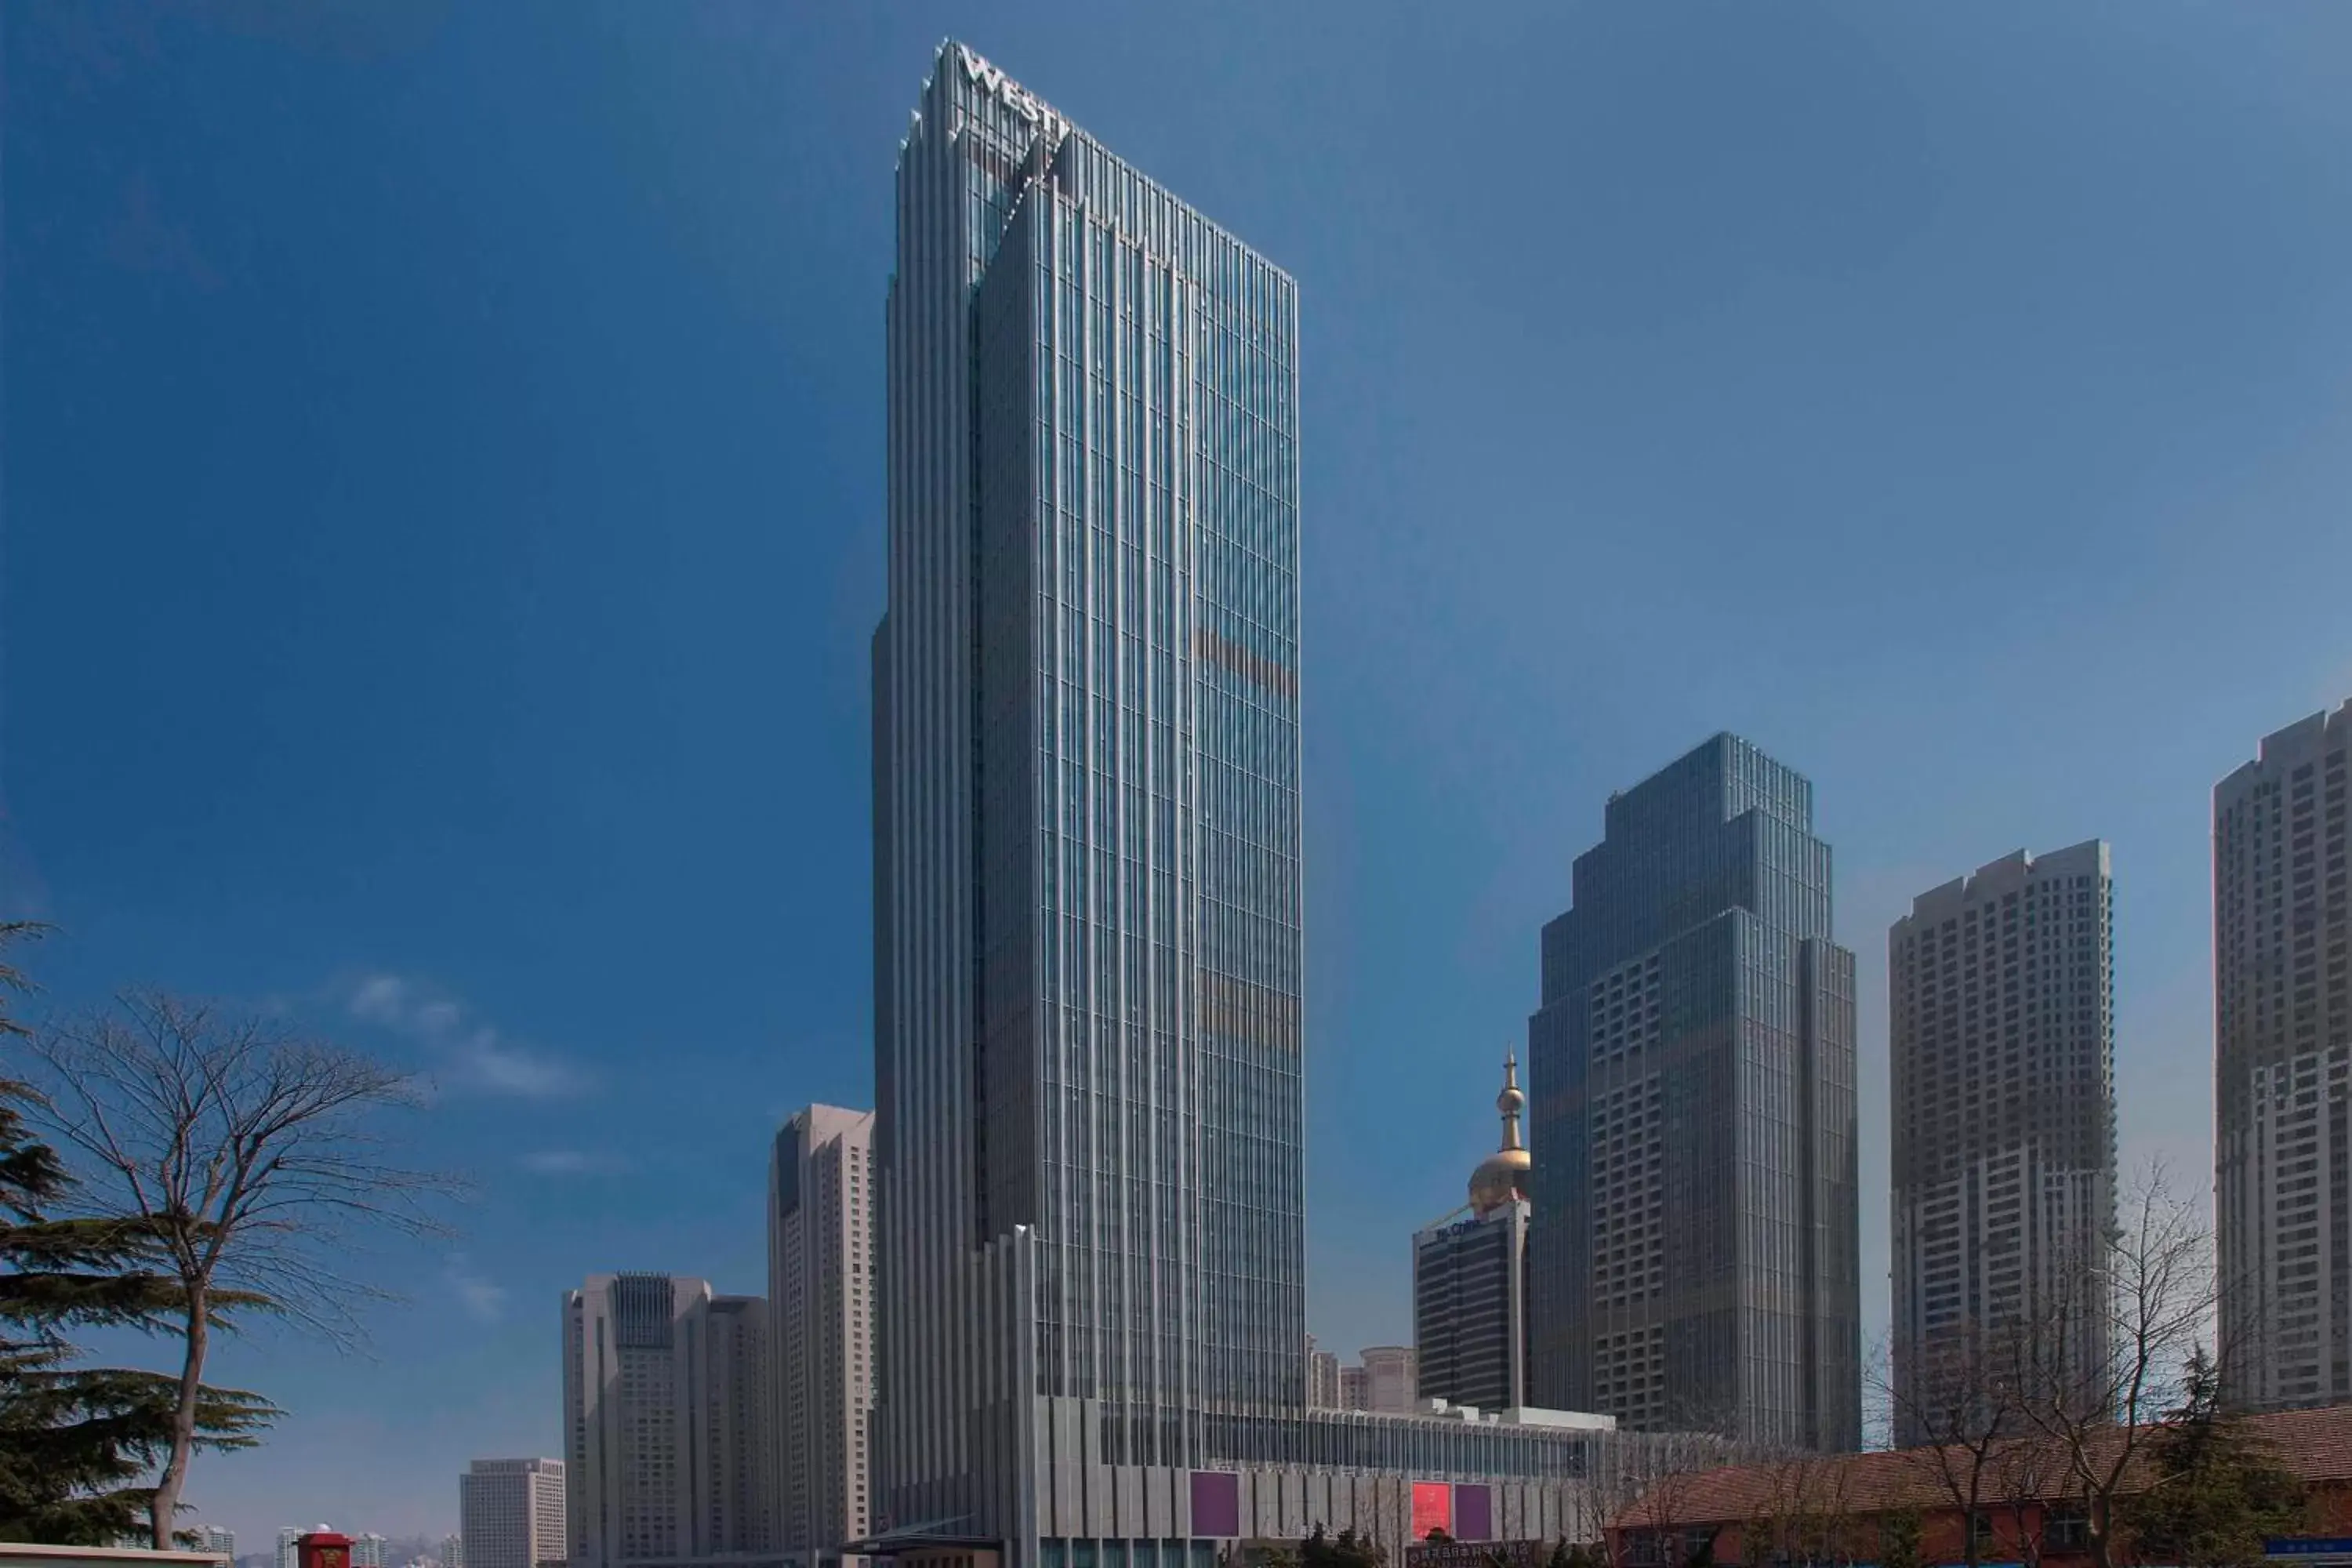 Property building in The Westin Qingdao - Instagrammable